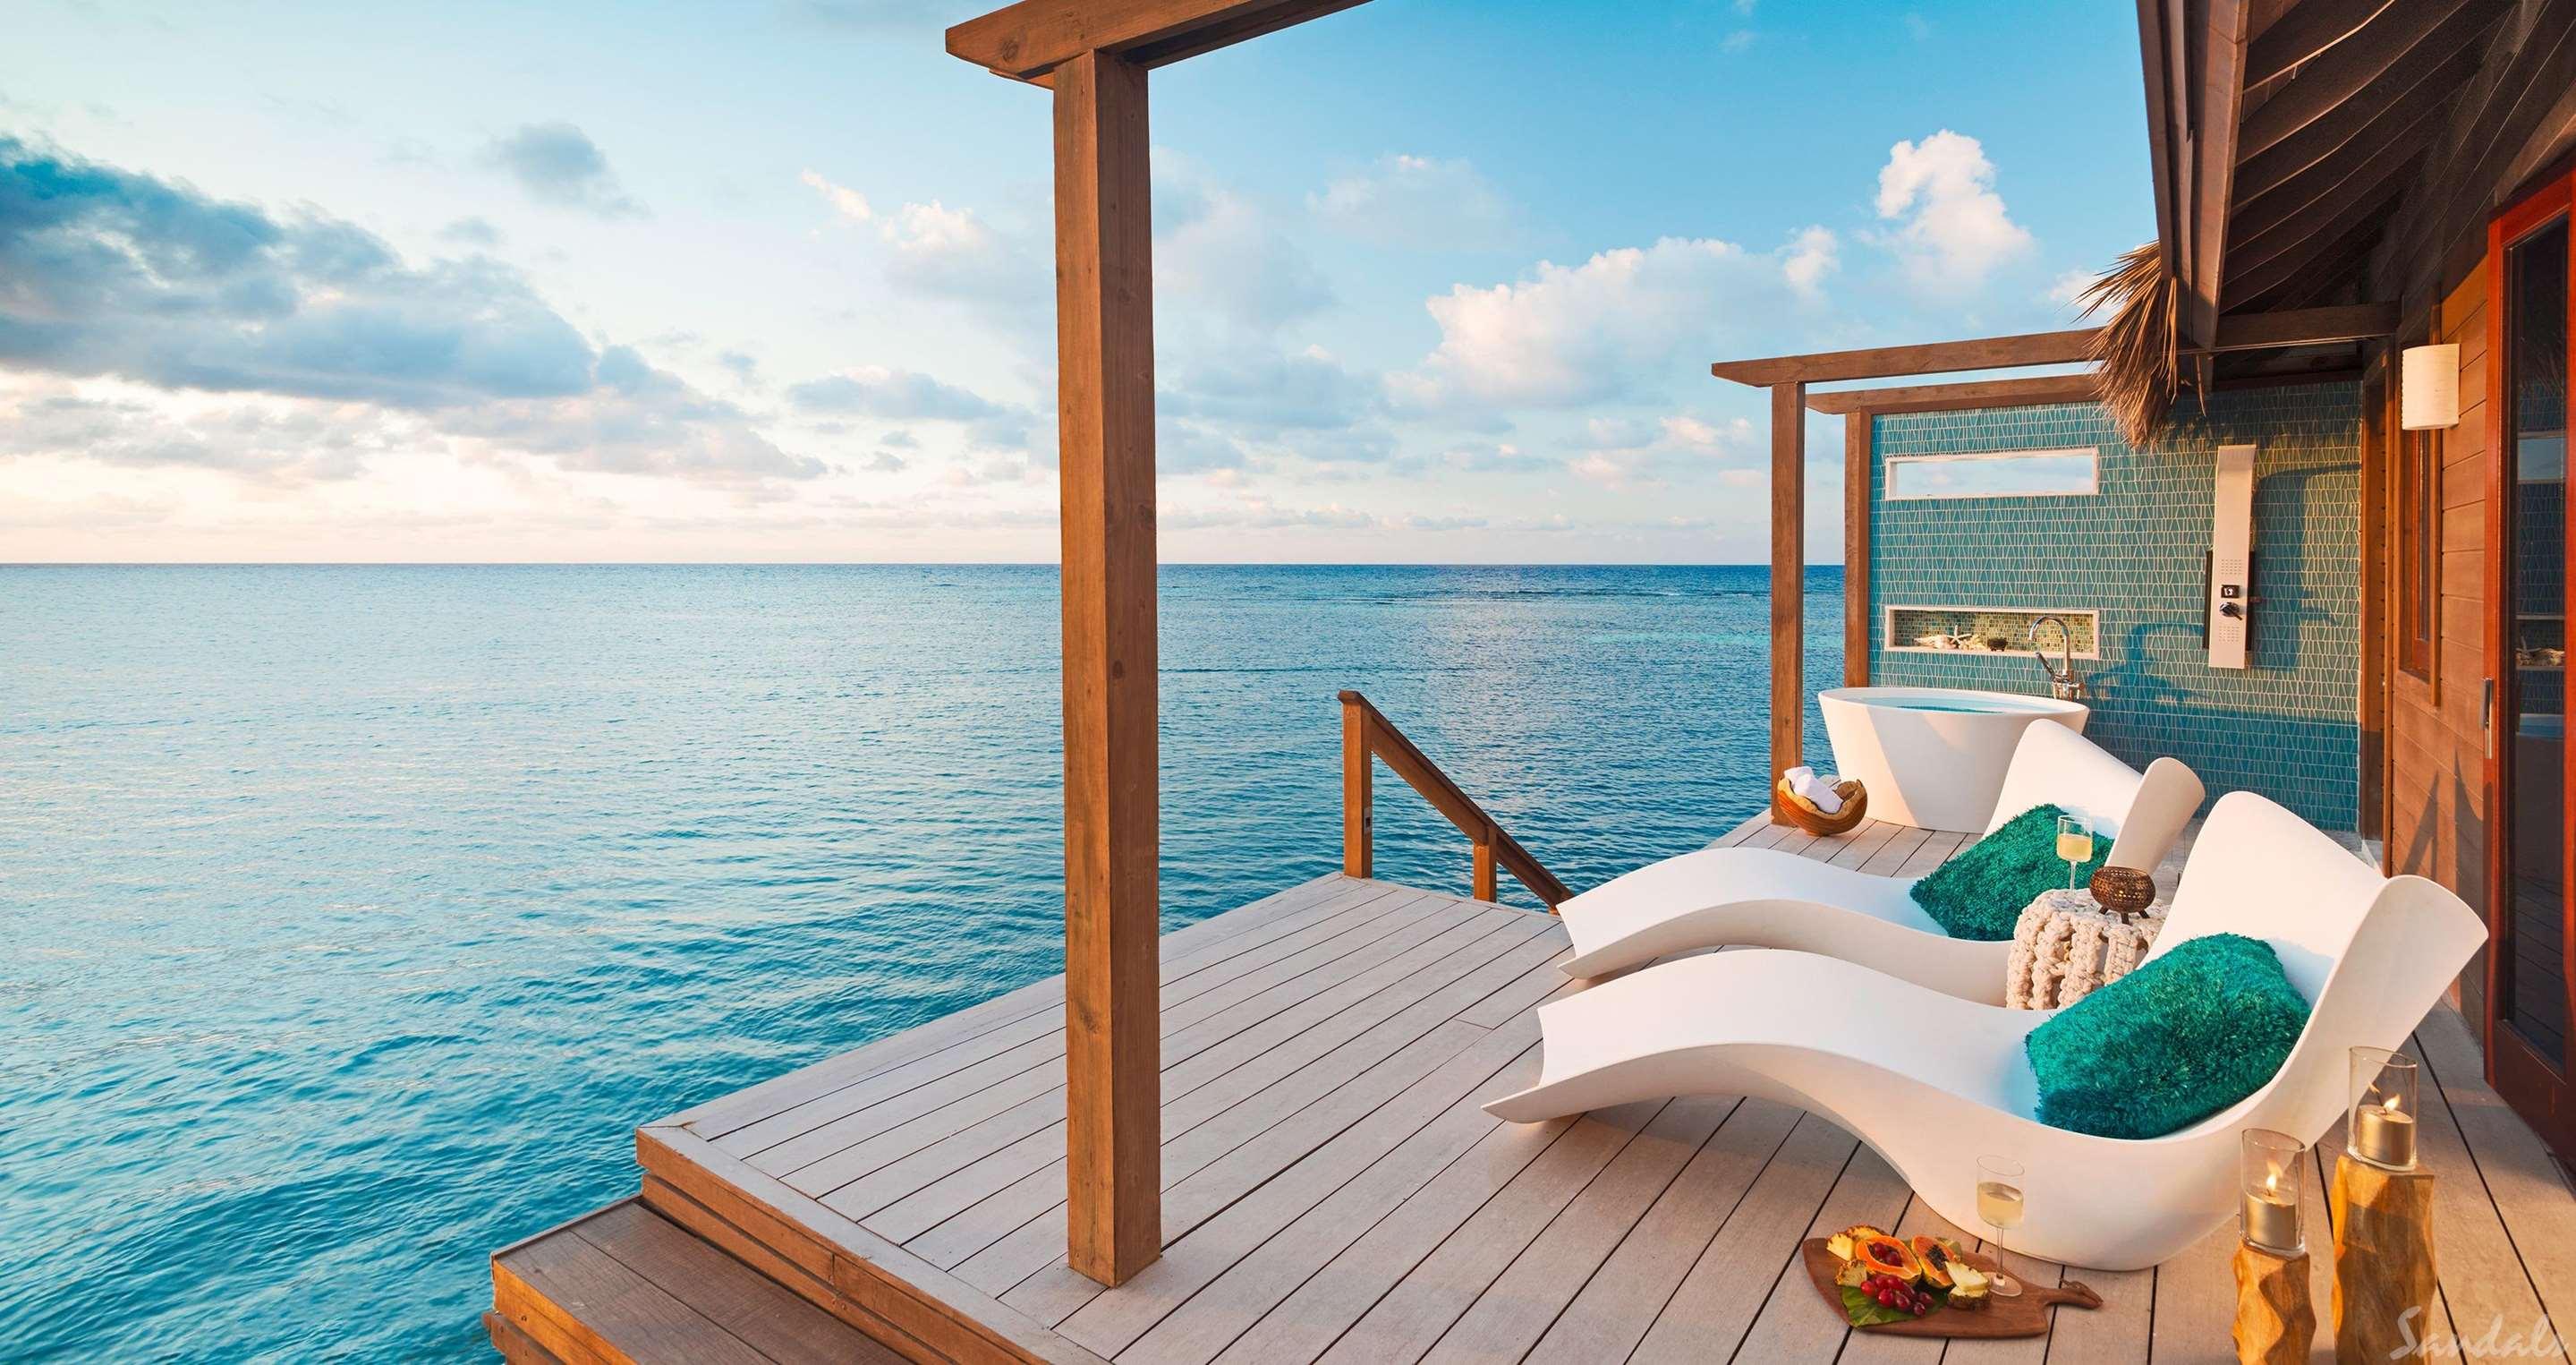 Sandals AllInclusive Overwater Bungalows in the Caribbean